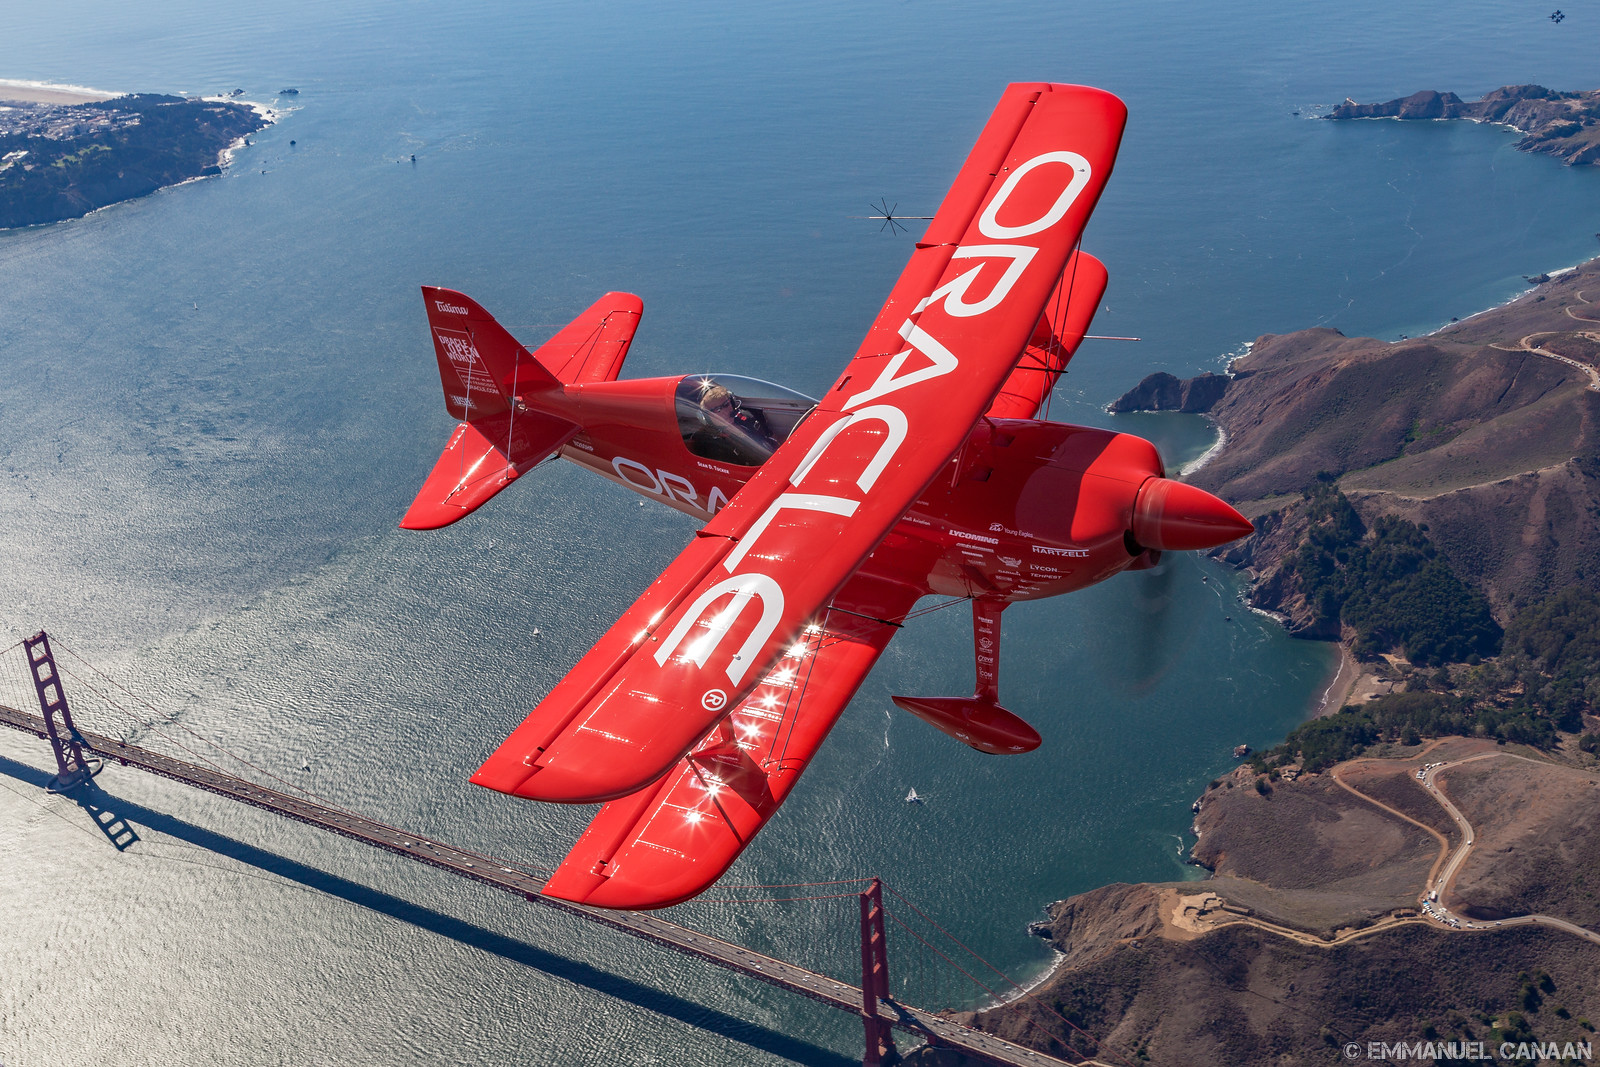 Sean D. Tucker cruises over the Golden Gate Bridge as he awaits the U.S. Navy Blue Angels during San Francisco's 2015 Fleet Week air show. You can just see a Blue Angels four-ship way in the background of the top right corner. (photo by Emmanuel Canaan)